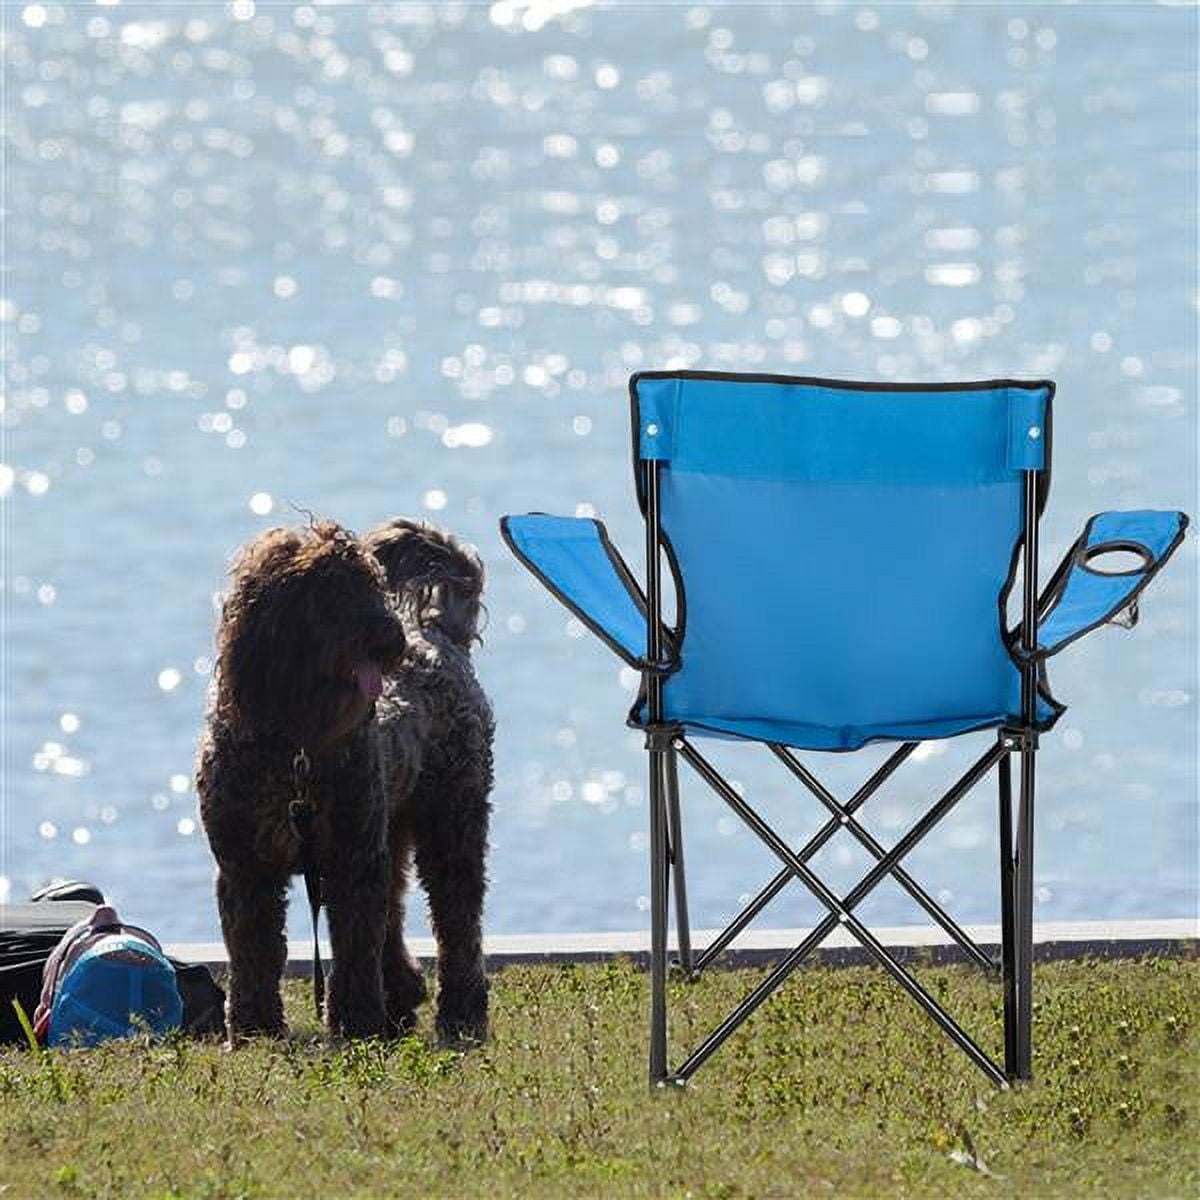 Portable Camping Chair with Cup Holder, Blue Foldable Chair for Fishing,  1PCS,19.69 x 19.69 x 31.50 in